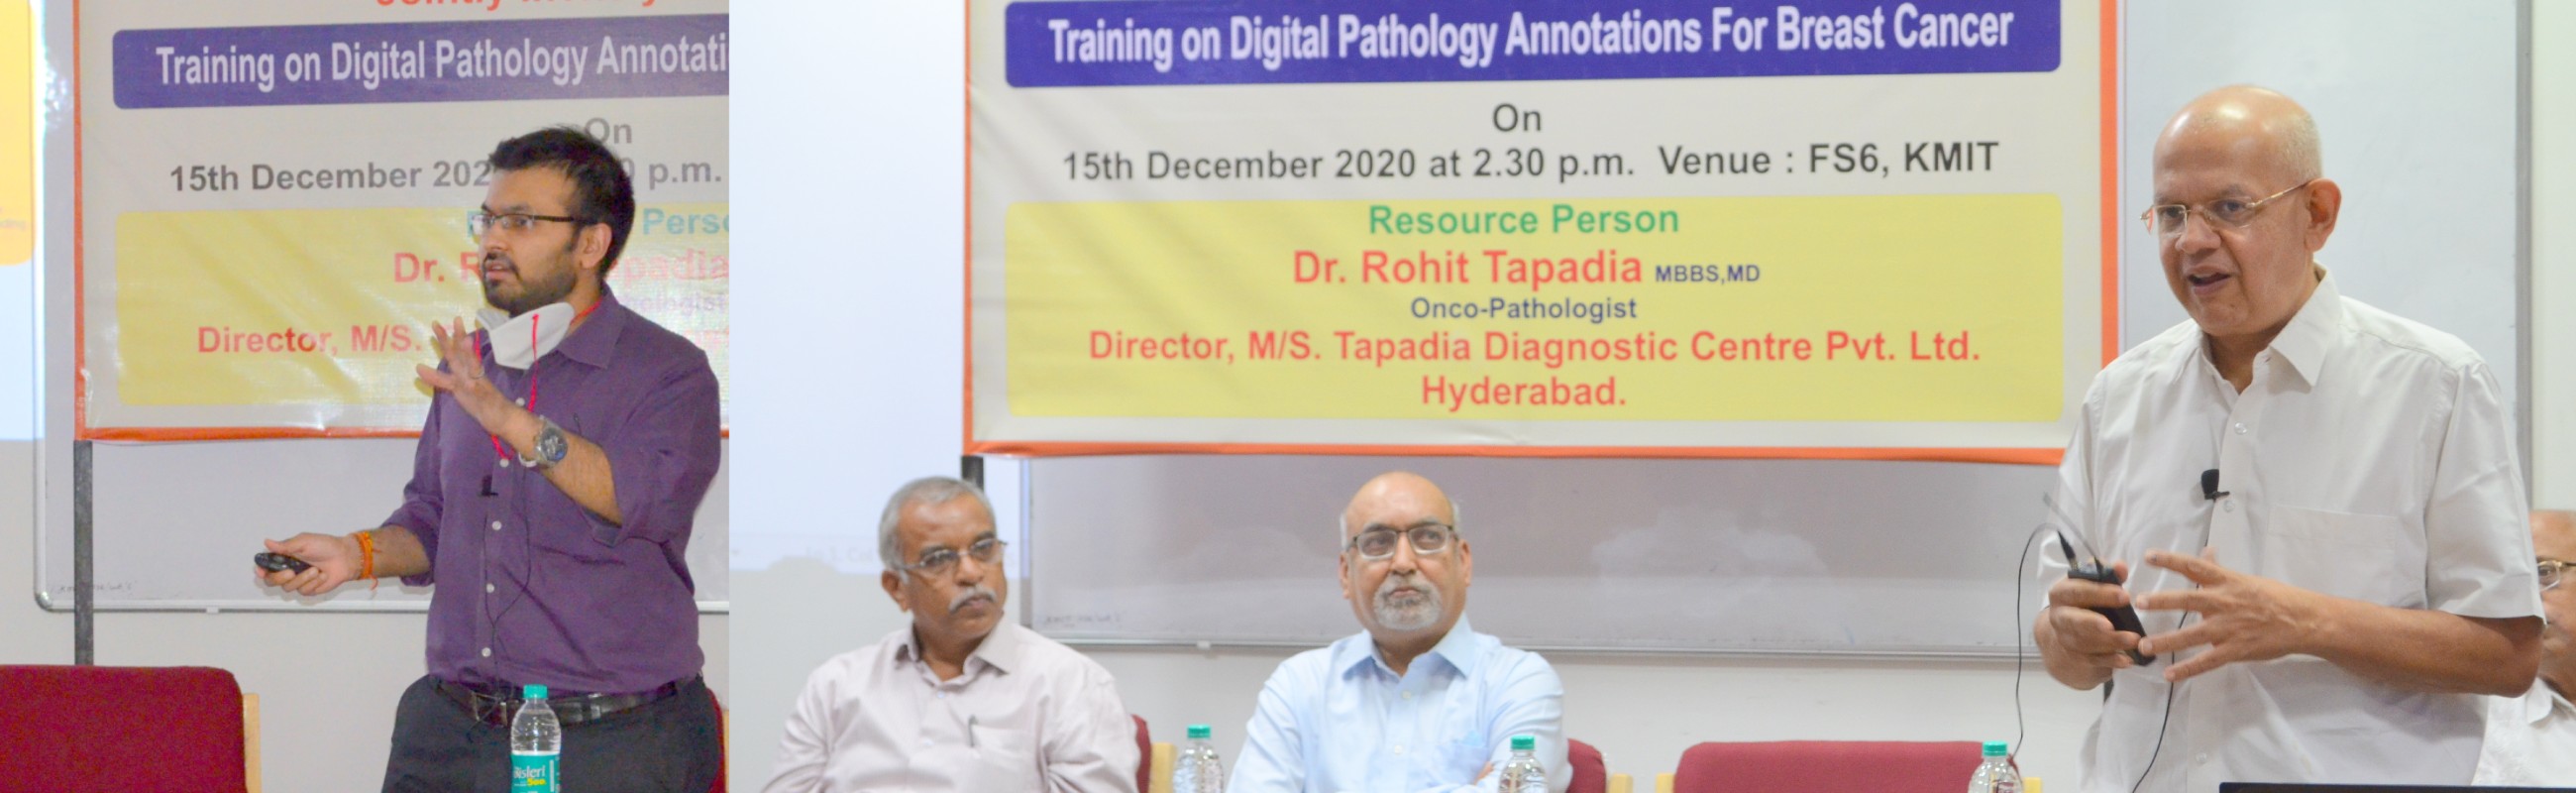 Training on Digital Pathology Annotations for Breast Cancer